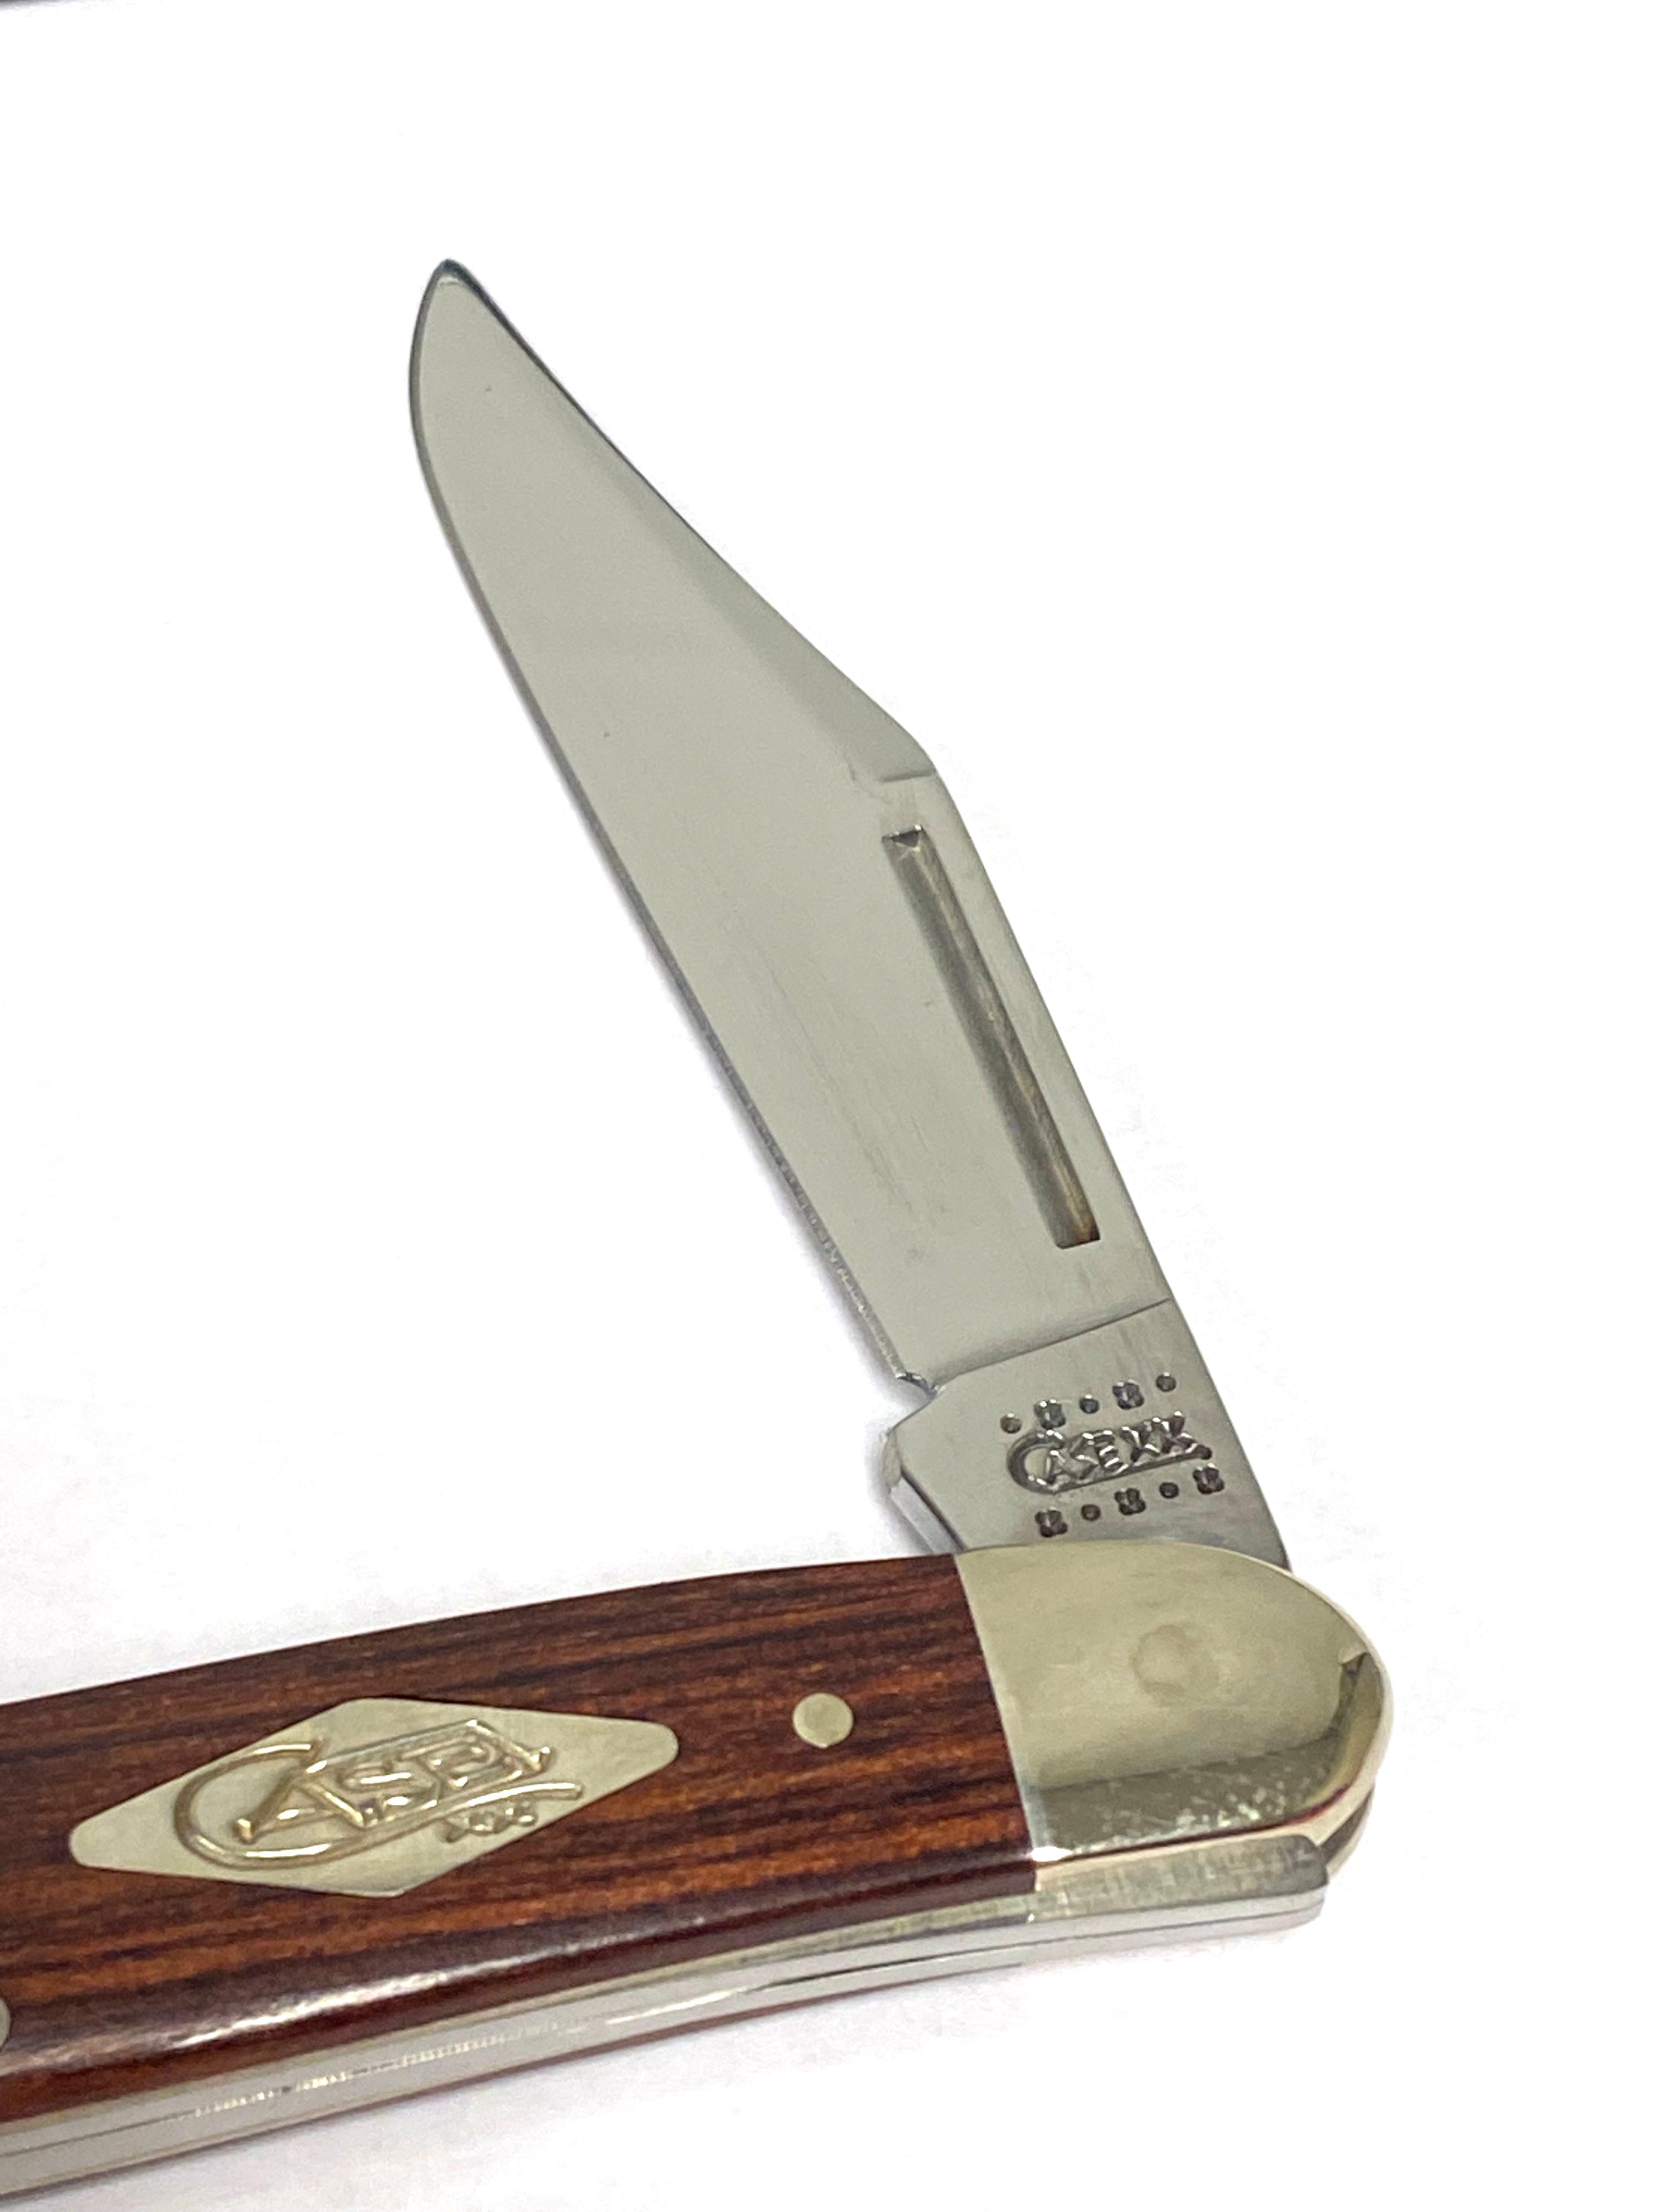 NIB Case XX 2000 Rosewood Whittler 7347WH SS Pocket Knife in box